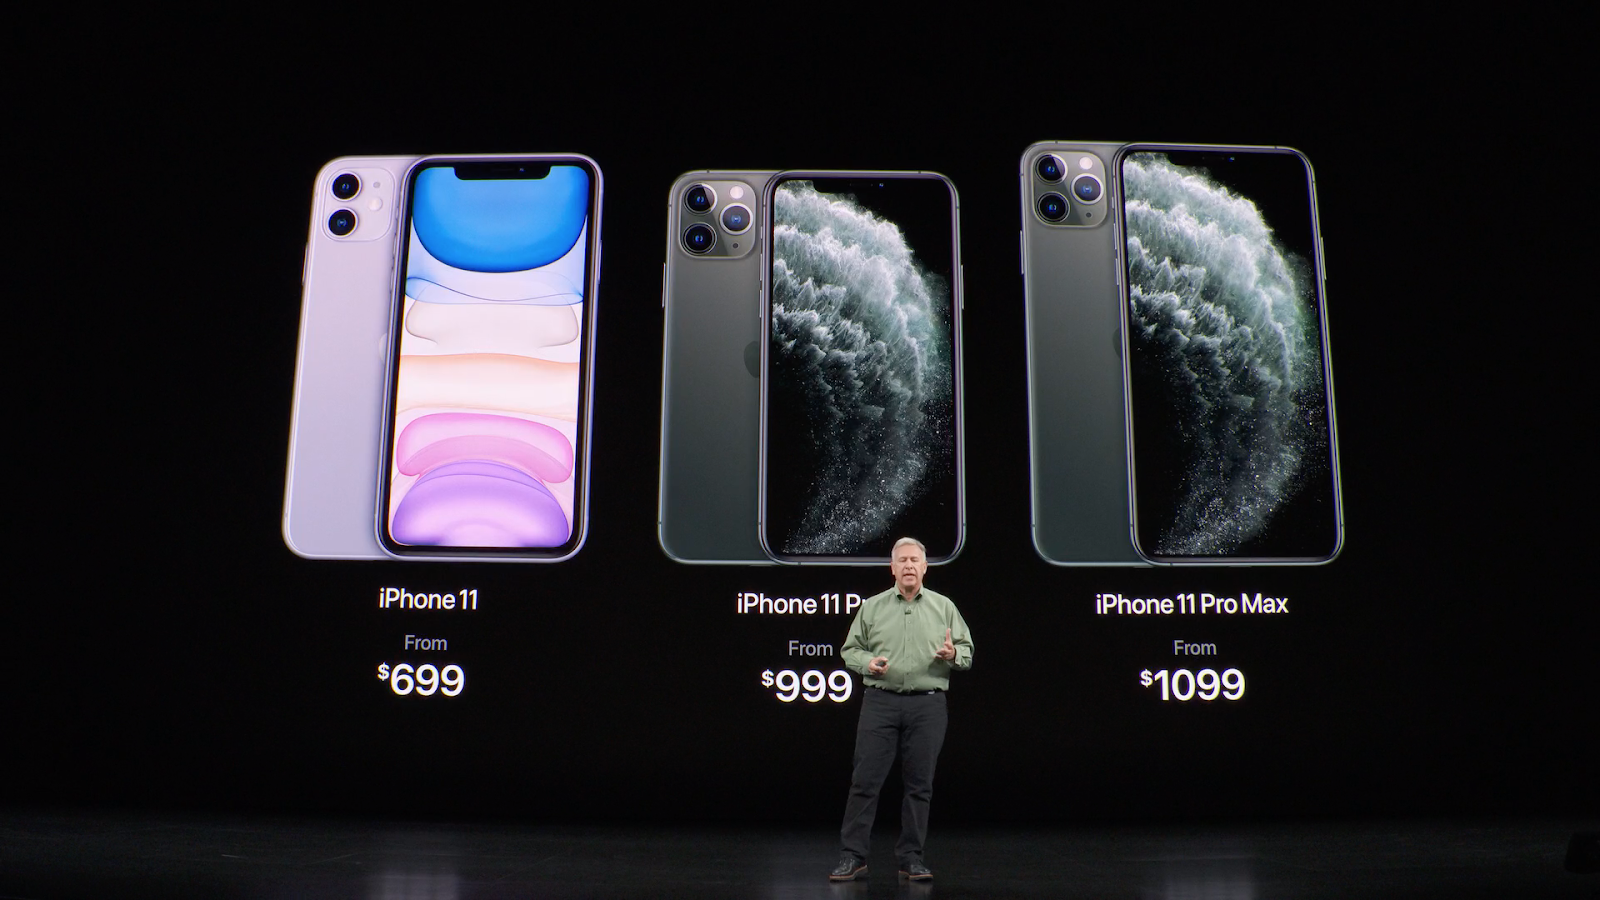 New Iphone 11 Iphone 11 Pro And Iphone 11 Pro Max Prices In